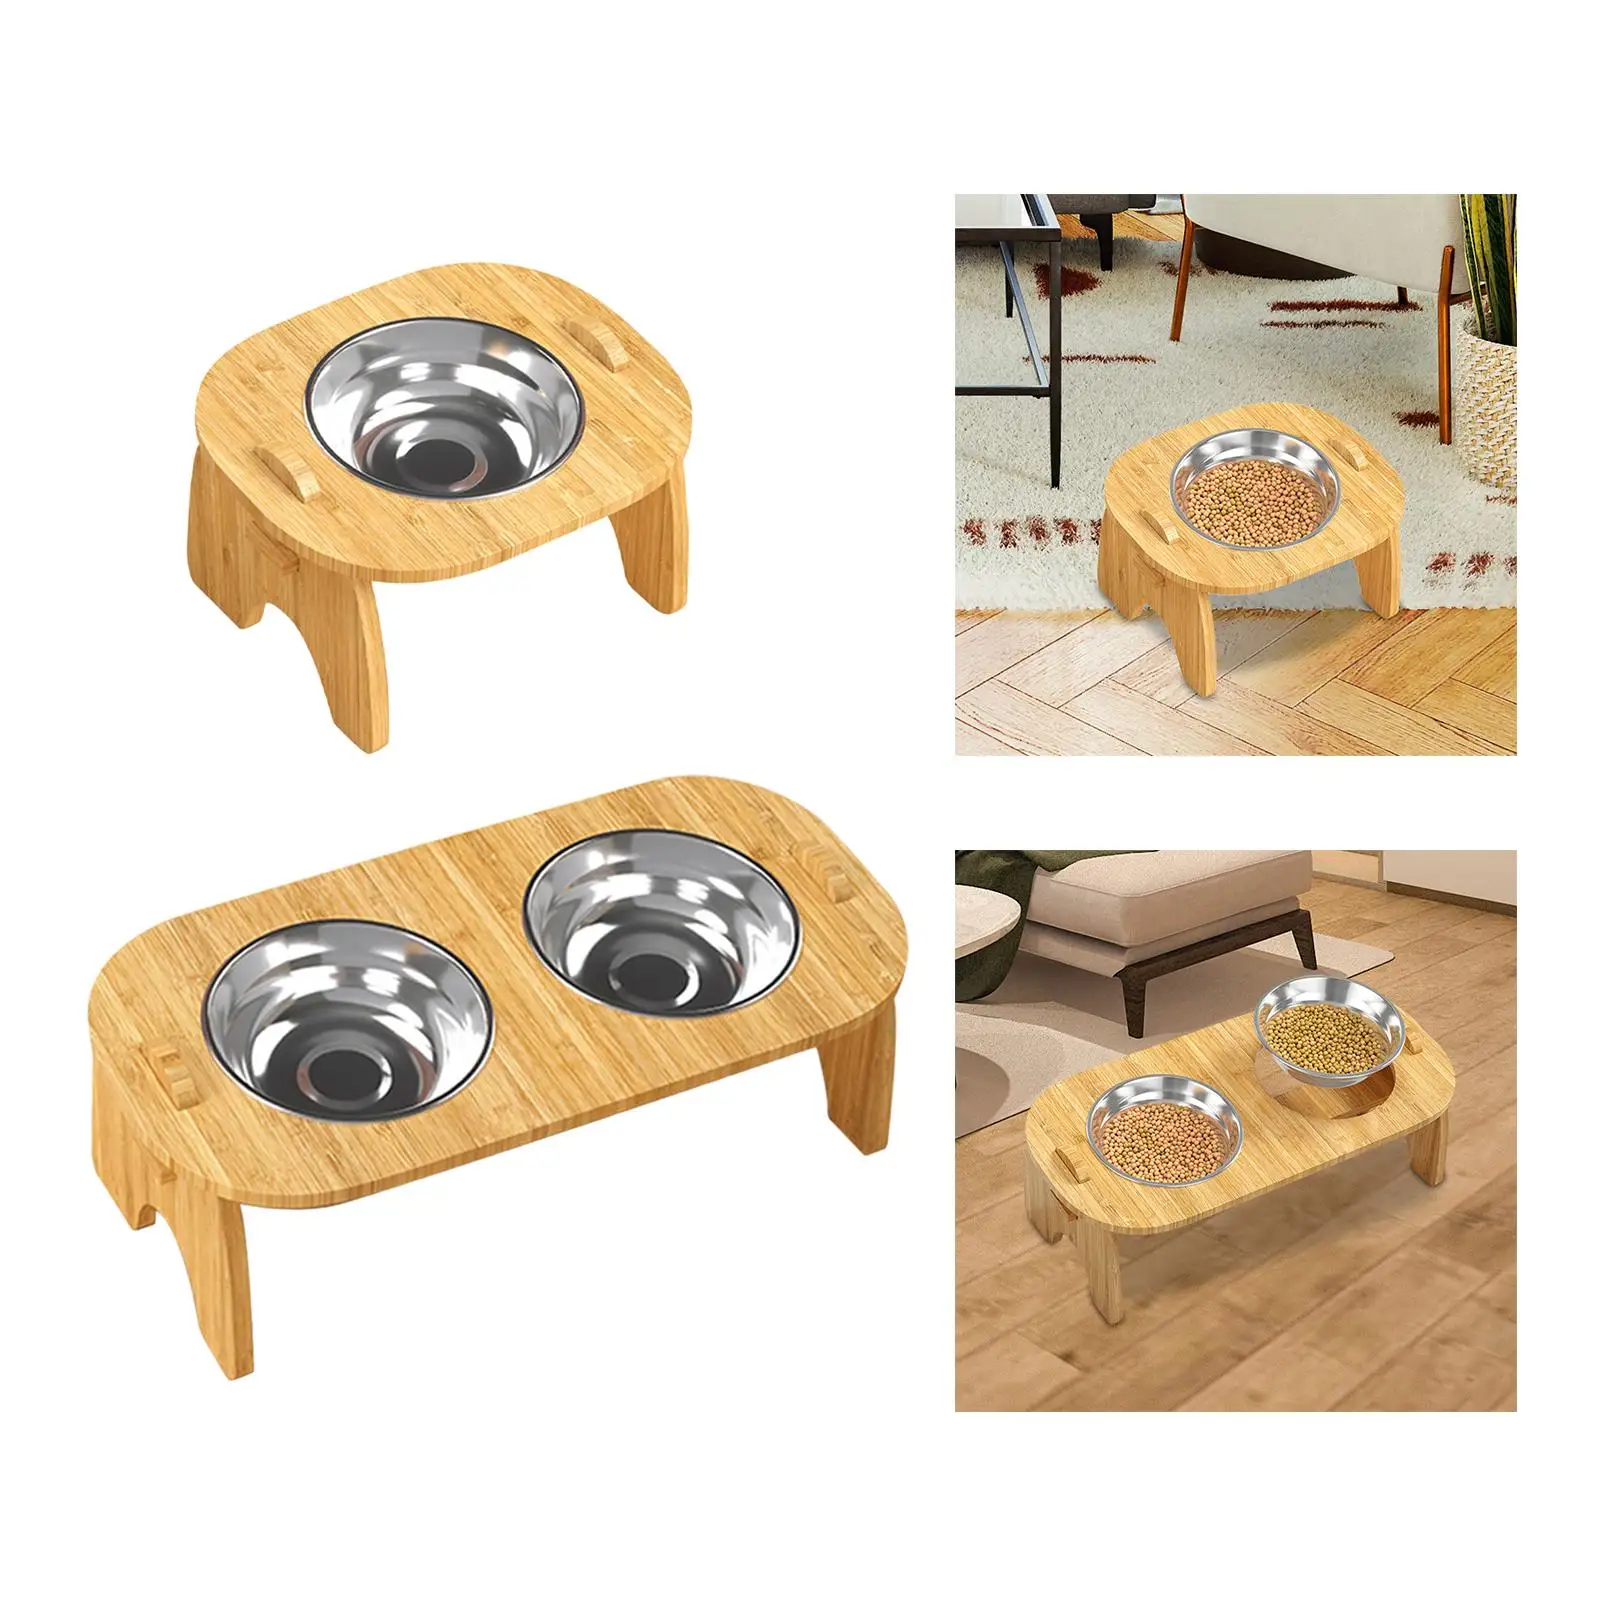 Elevated Pet Bowls Lightweight Kitty Drinking Bowl Raised Cat Feeder Cat Bowls Food Feeding Bowl for Small Medium Large Dogs